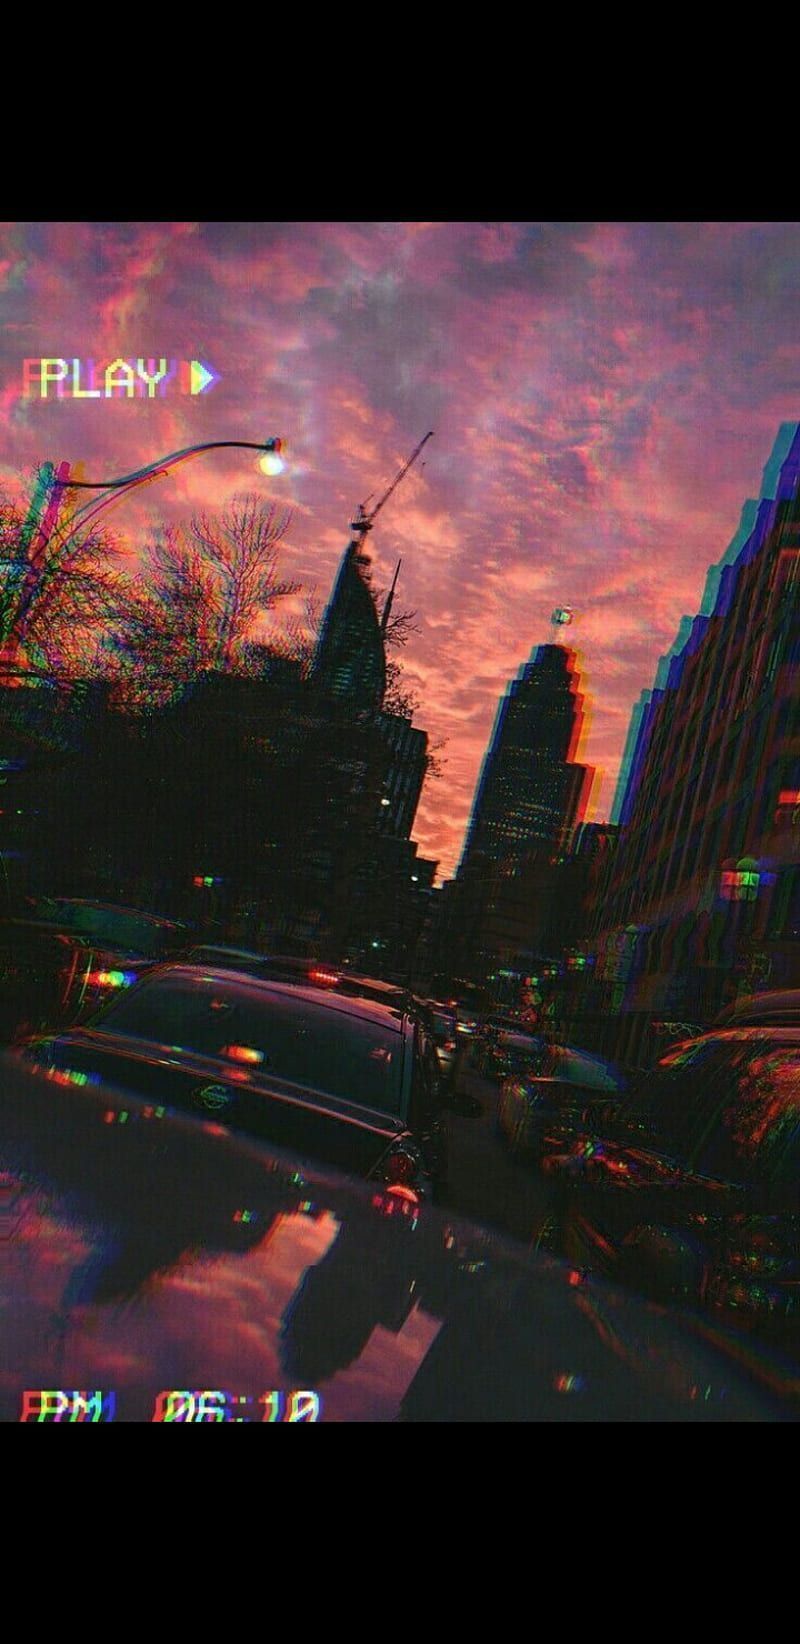 Aesthetic background of a city with a pink and purple sunset - City, phone, Windows 10, HD, VHS